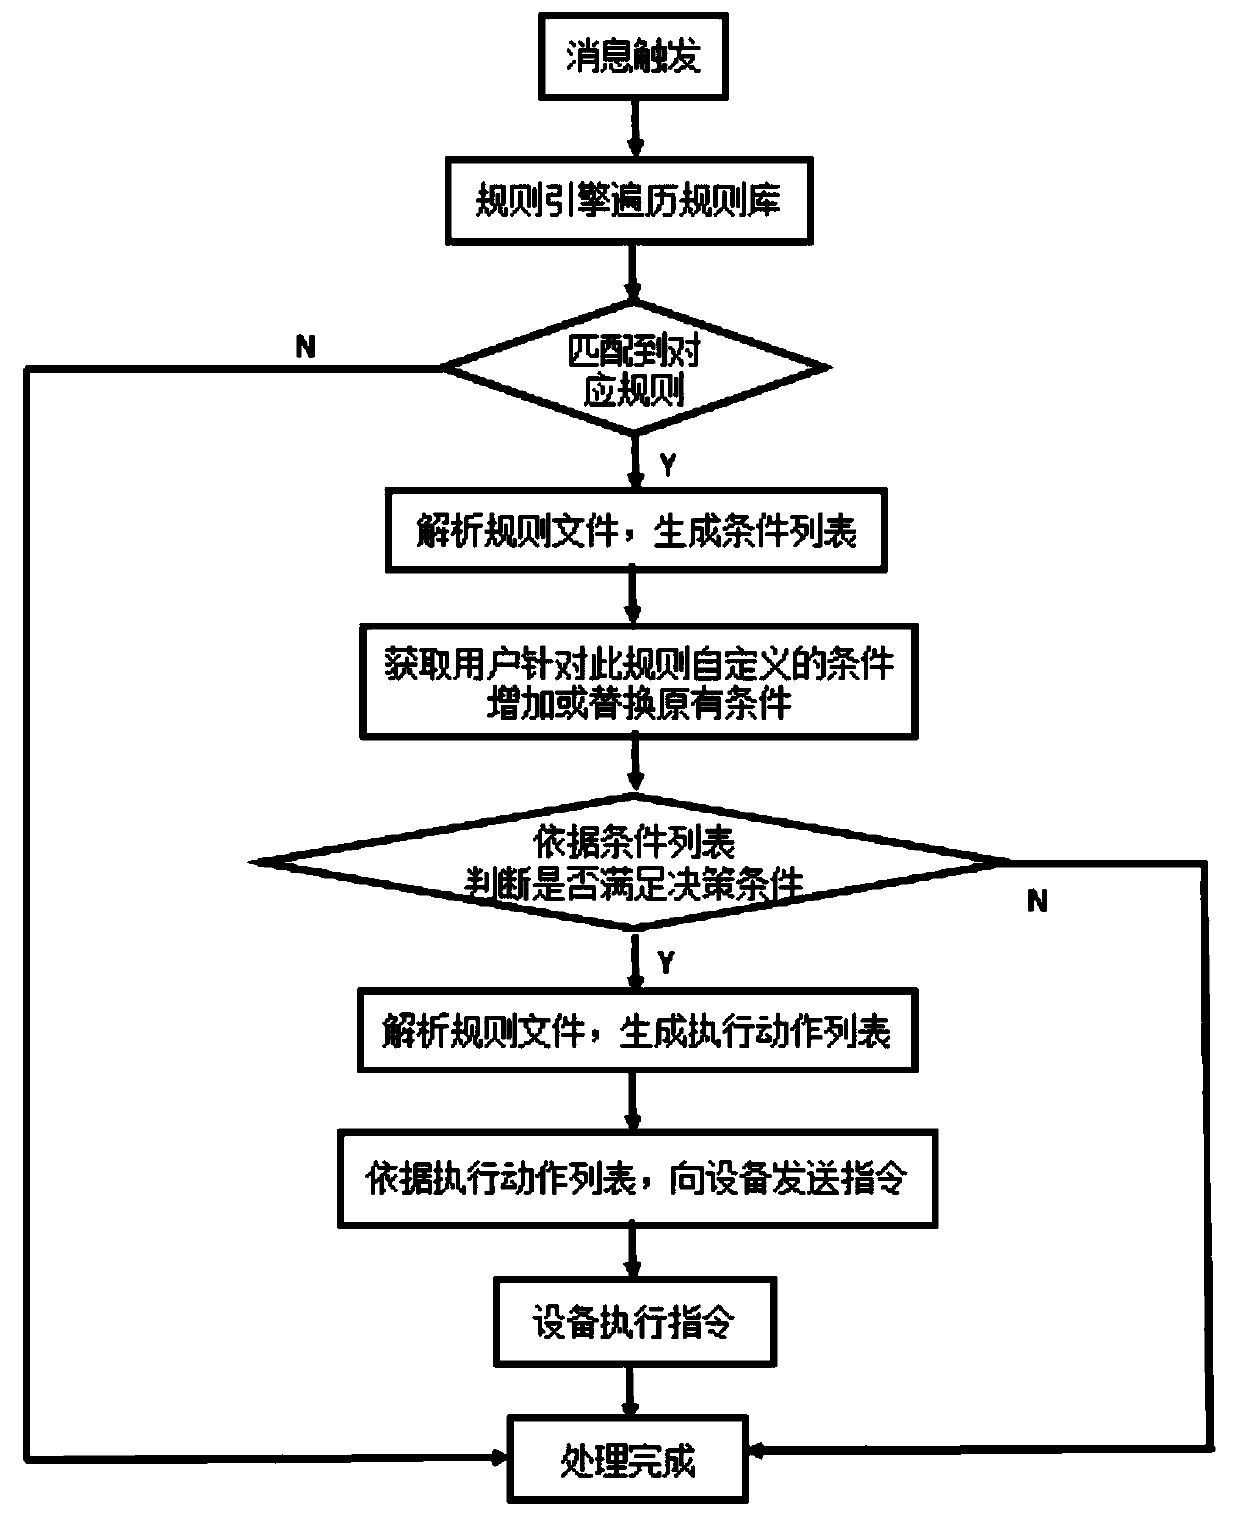 Equipment control system and method based on rule files